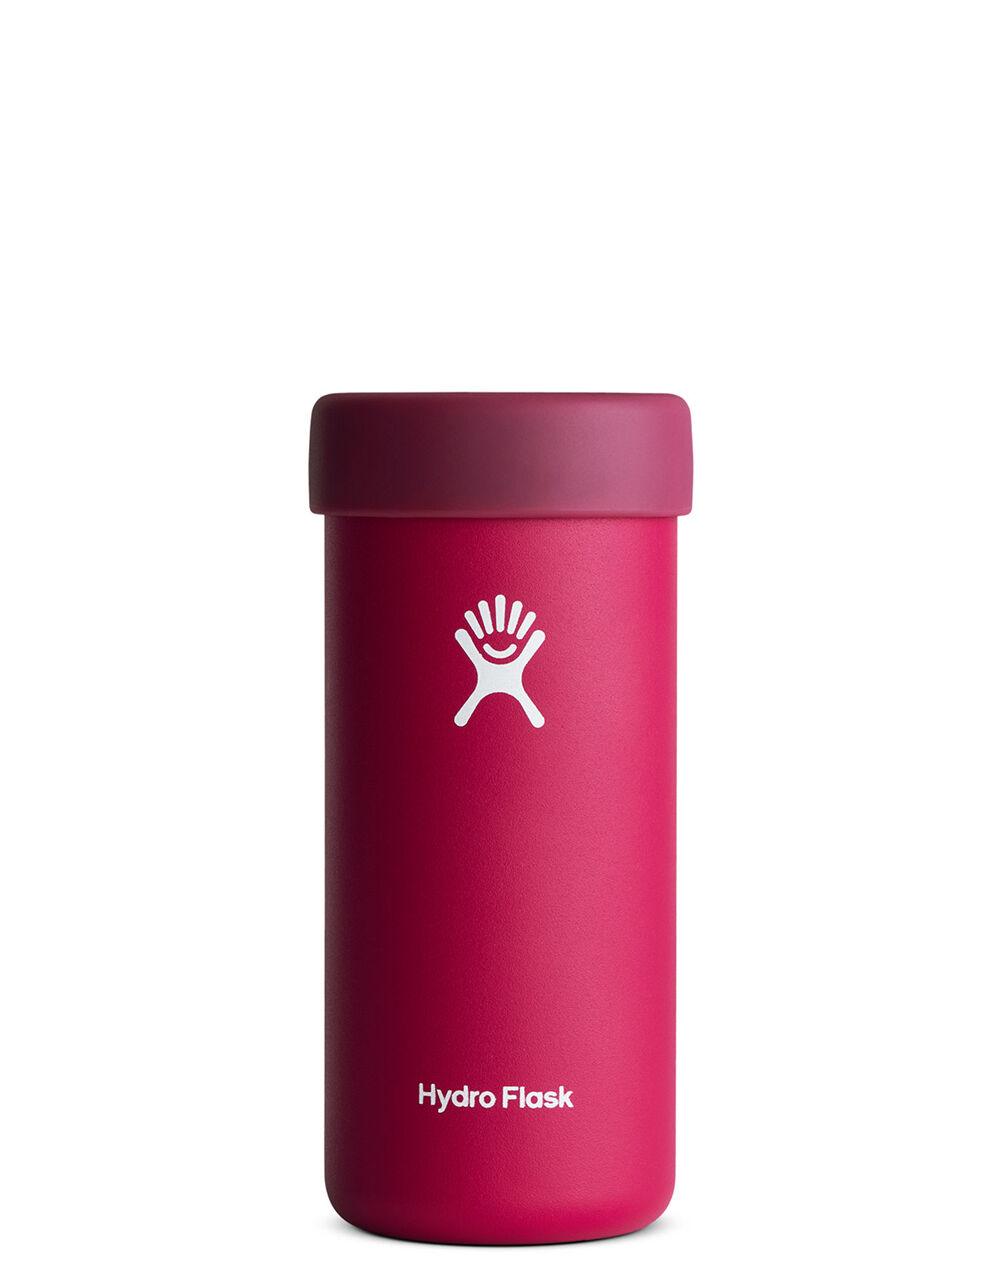 Hydro Flask Slim Cooler Cup